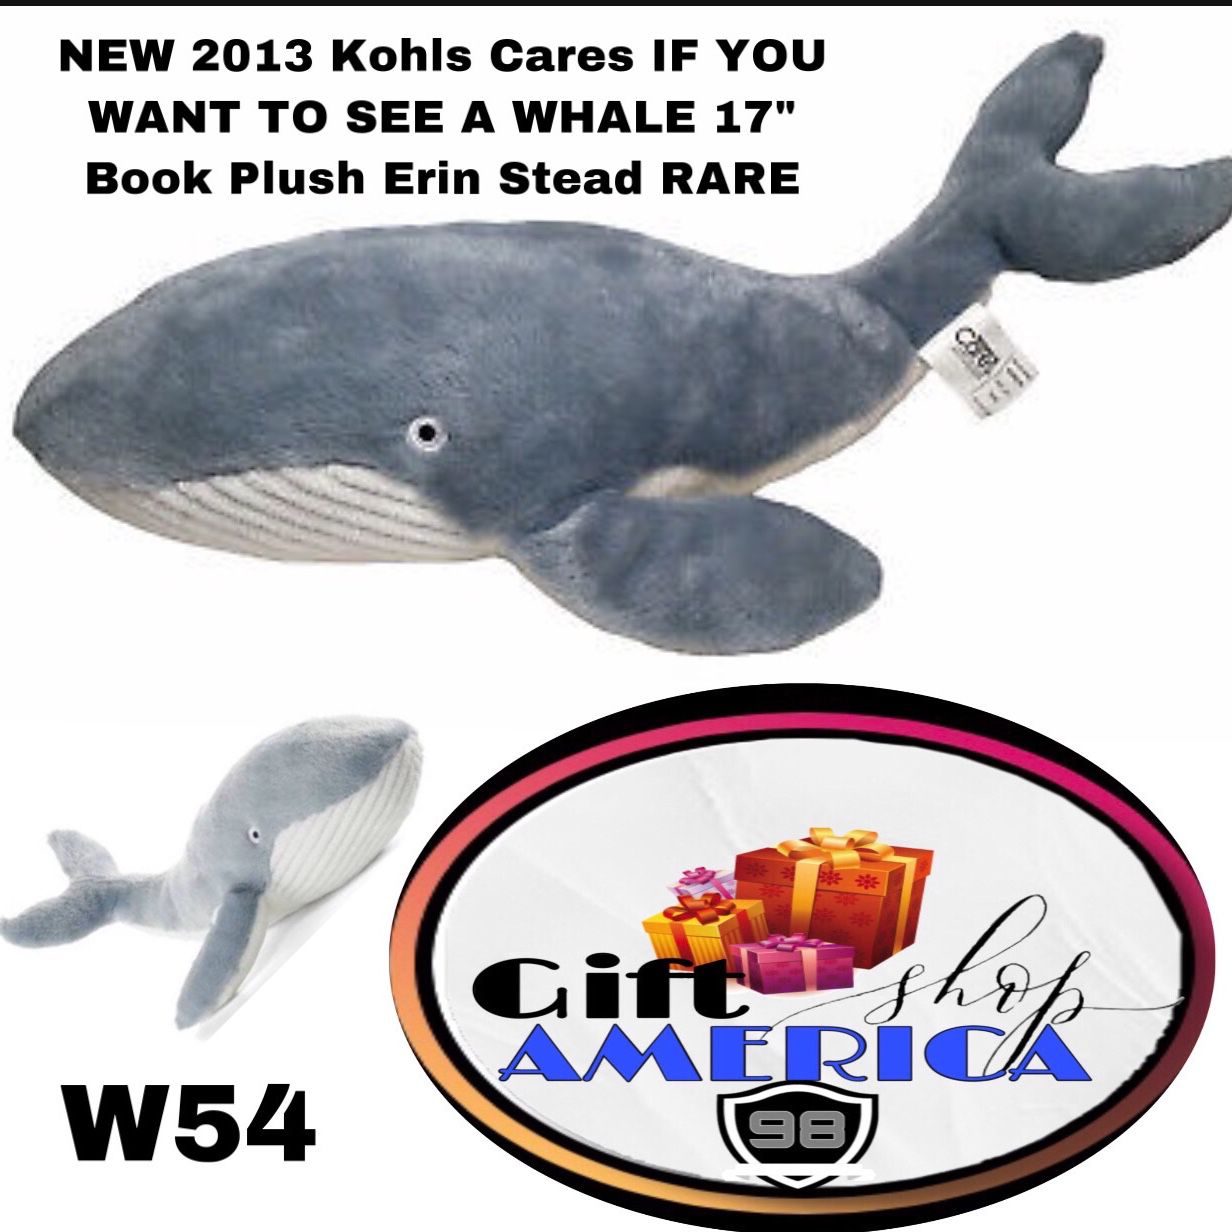 Kohl's If You Want to See a Whale Book Plush 2013 Erin Stead Kohls D8 for sale online 